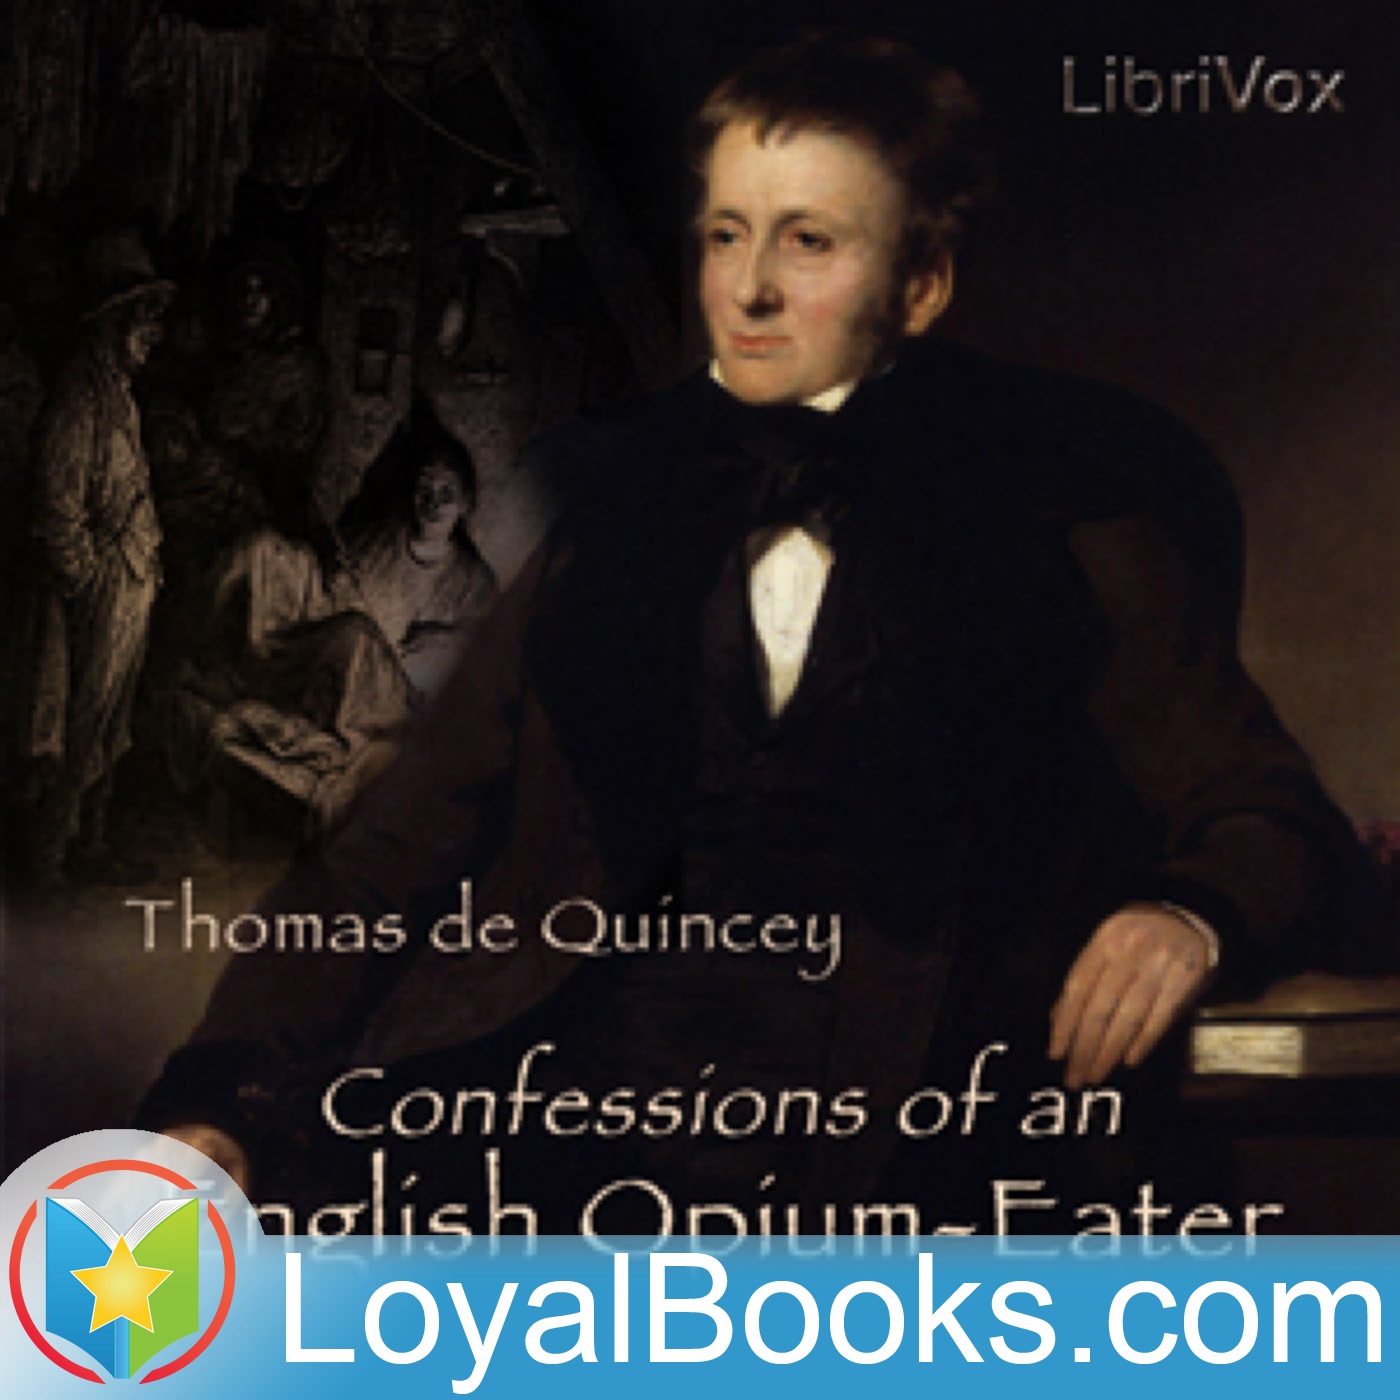 Confessions of an English Opium-Eater by Thomas de Quincey